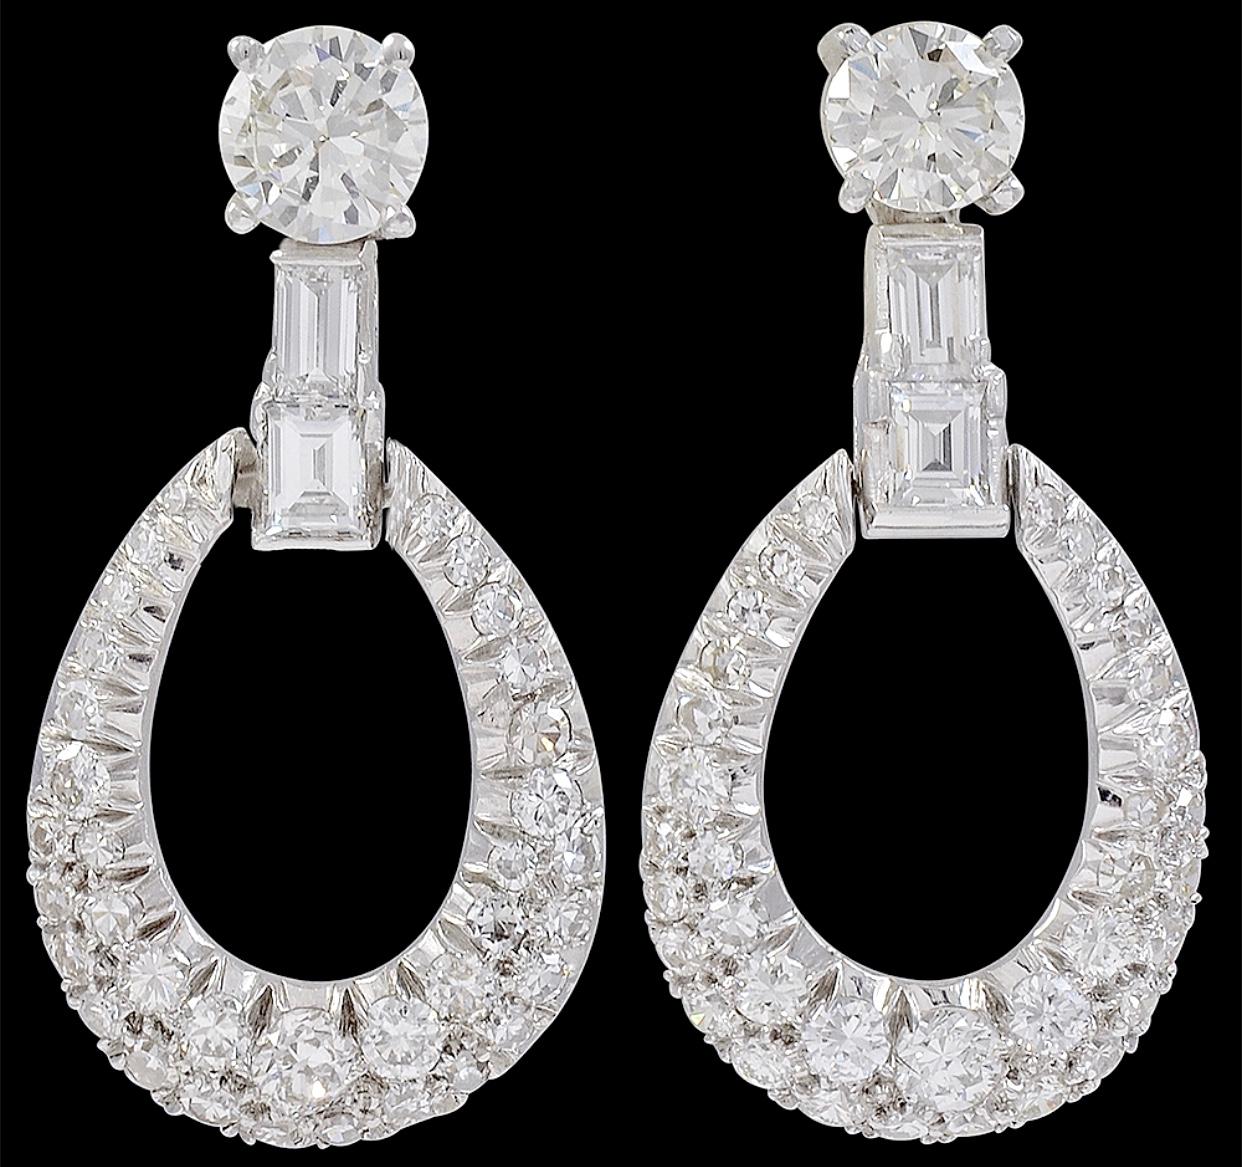 1950s 7 Ct Diamond Drop Cocktail Earrings Platinum with 2 Ct Solitaire Diamond For Sale 2